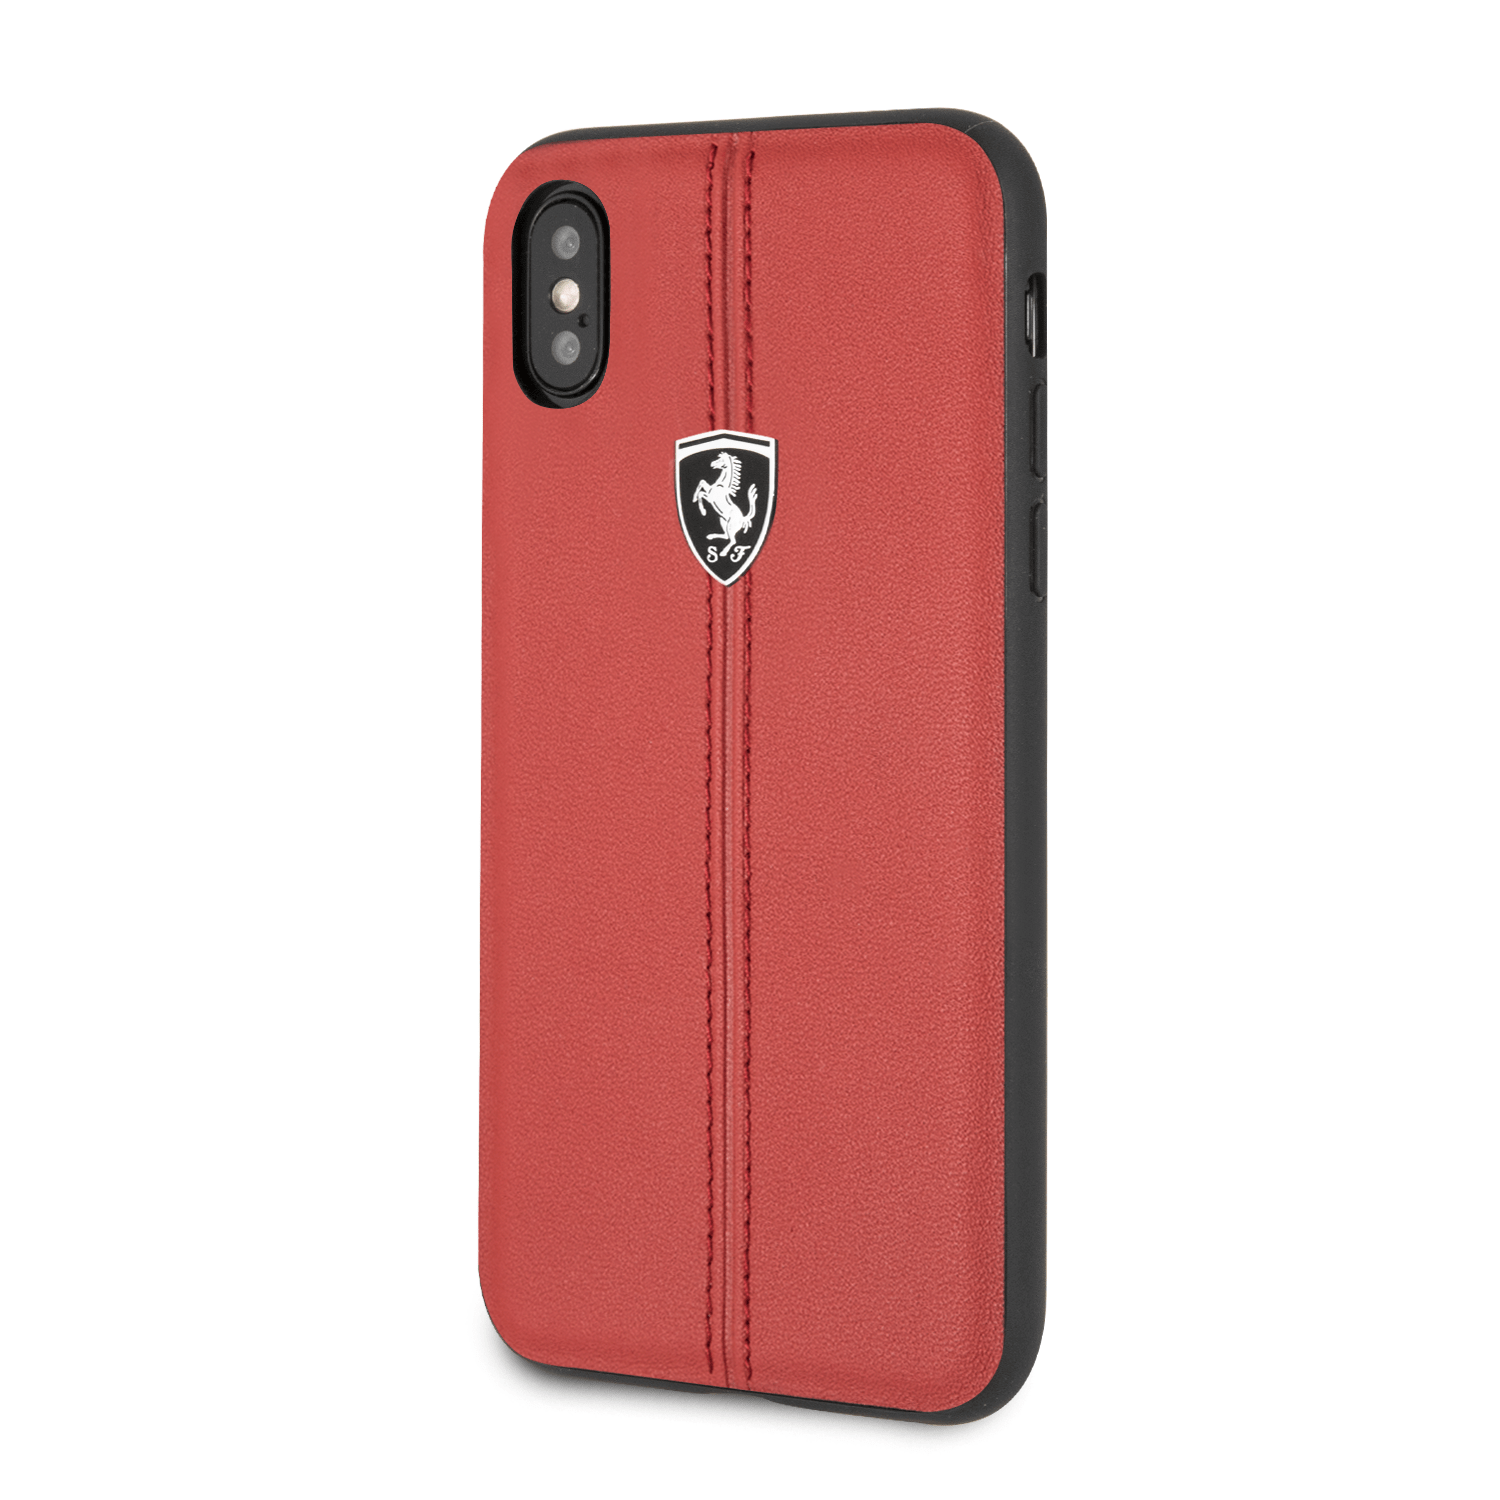 Official Ferrari Genuine Leather Heritage Red Case for iPhone X & iPhone XS